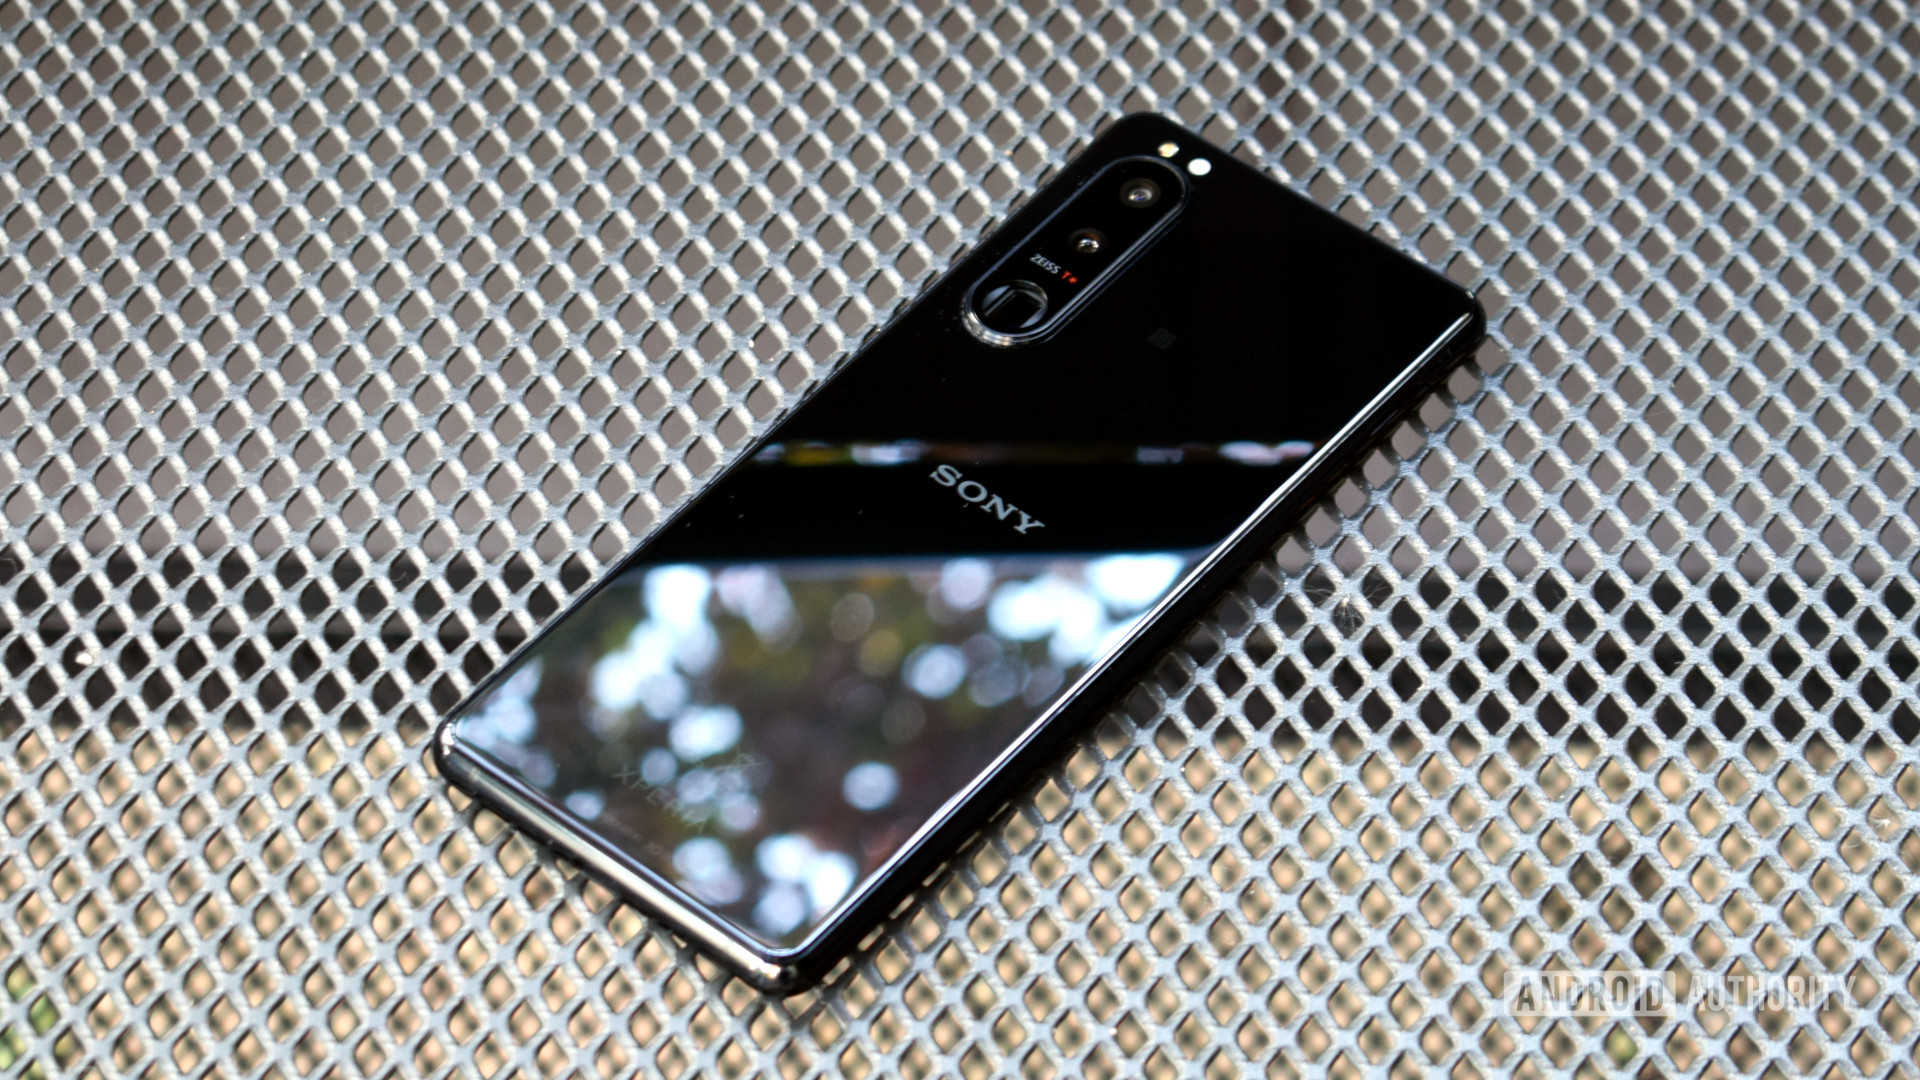 Sony Xperia 5 III face down on grid